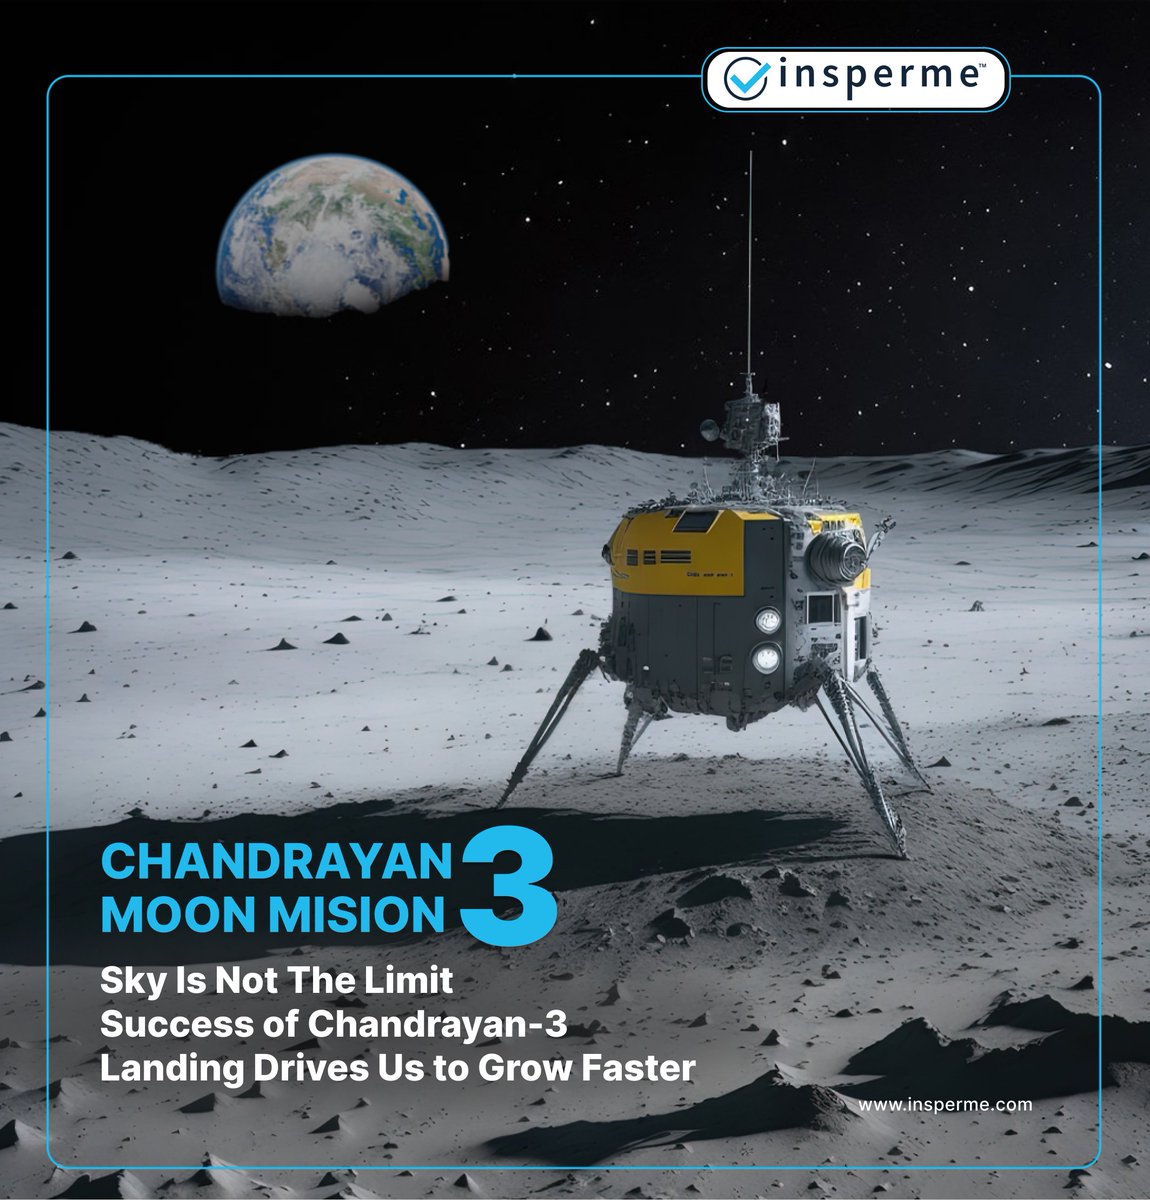 India Creates History With Soft-Landing On the Moon! 🌕

#India becomes the FIRST COUNTRY to ever reach the Southern Polar Region part of the lunar surface in one piece — and only the FOURTH COUNTRY ever to land on the moon.
Congratulations Team ISRO! 
#chandrayaan3mission #isro